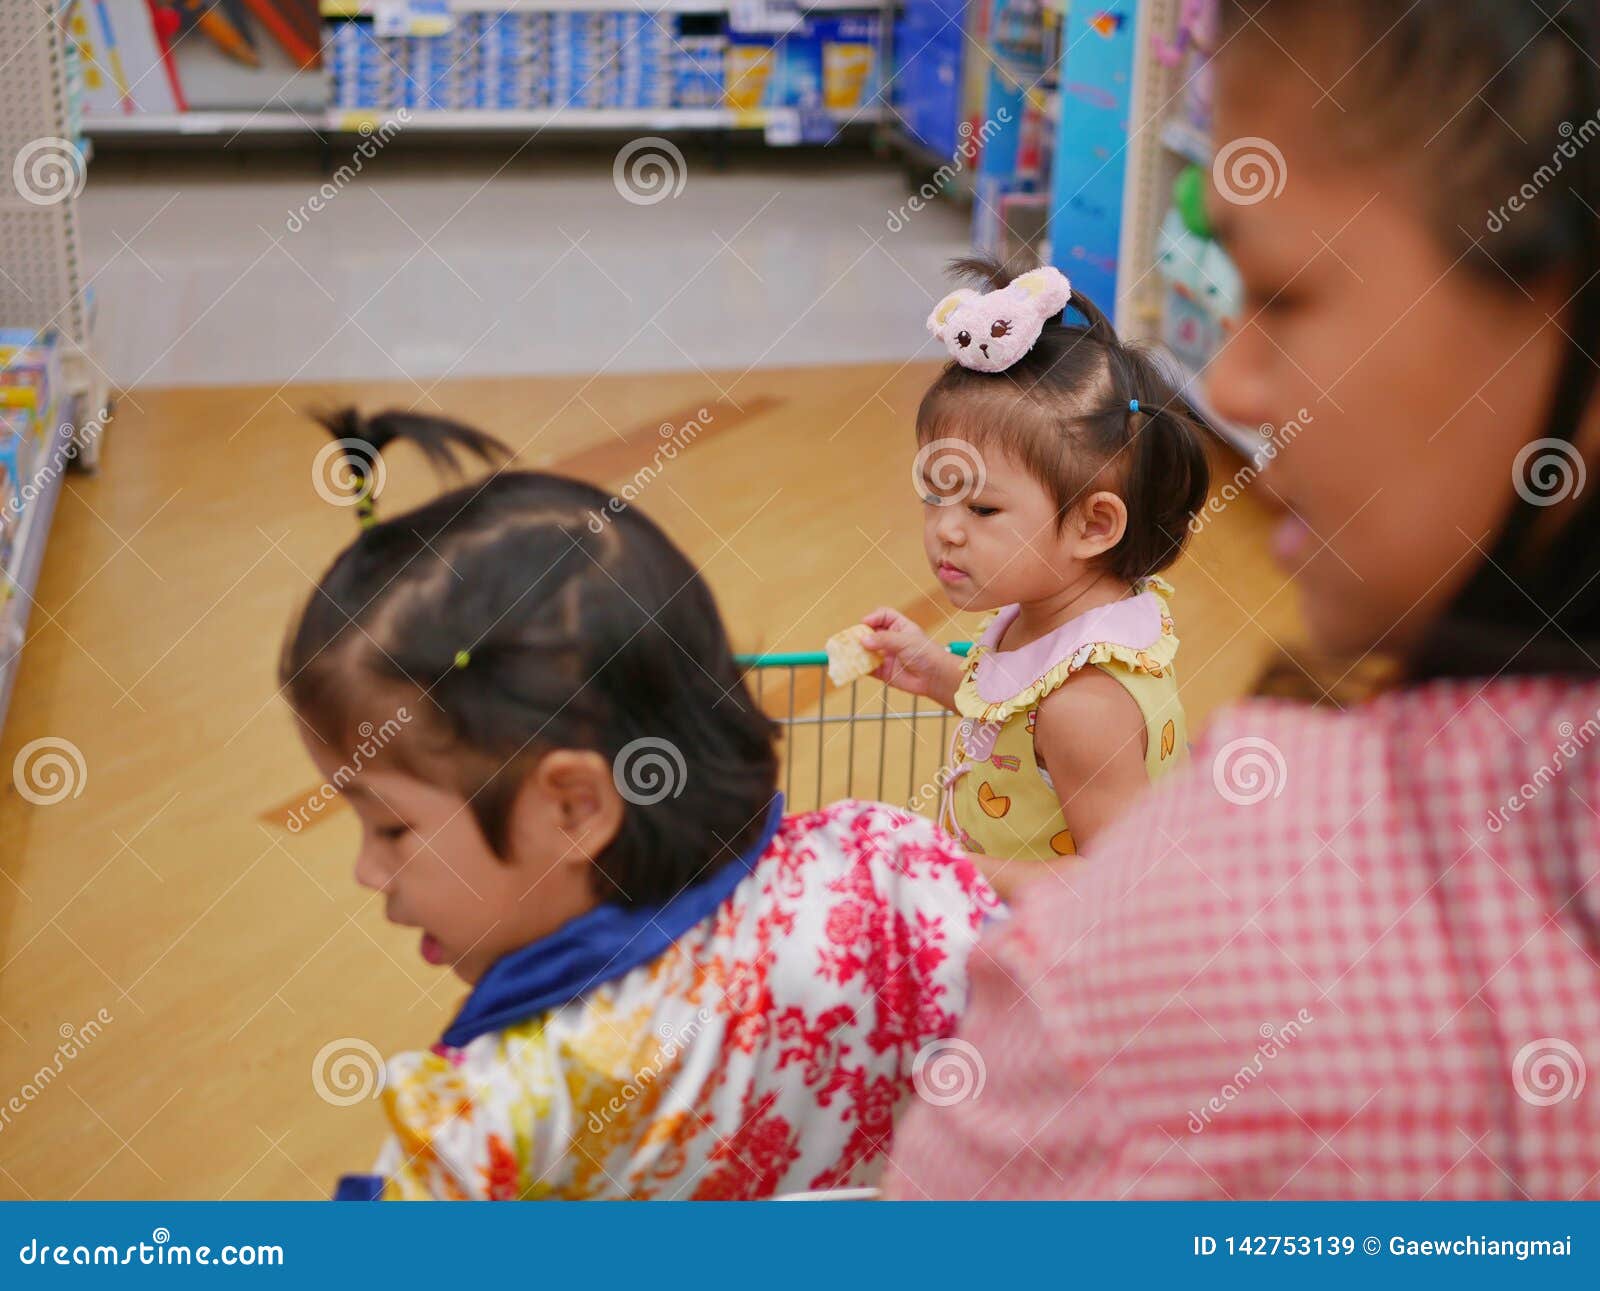 selective focus of little asian baby girl  furthest  looking and standing in a shopping cart with her sister